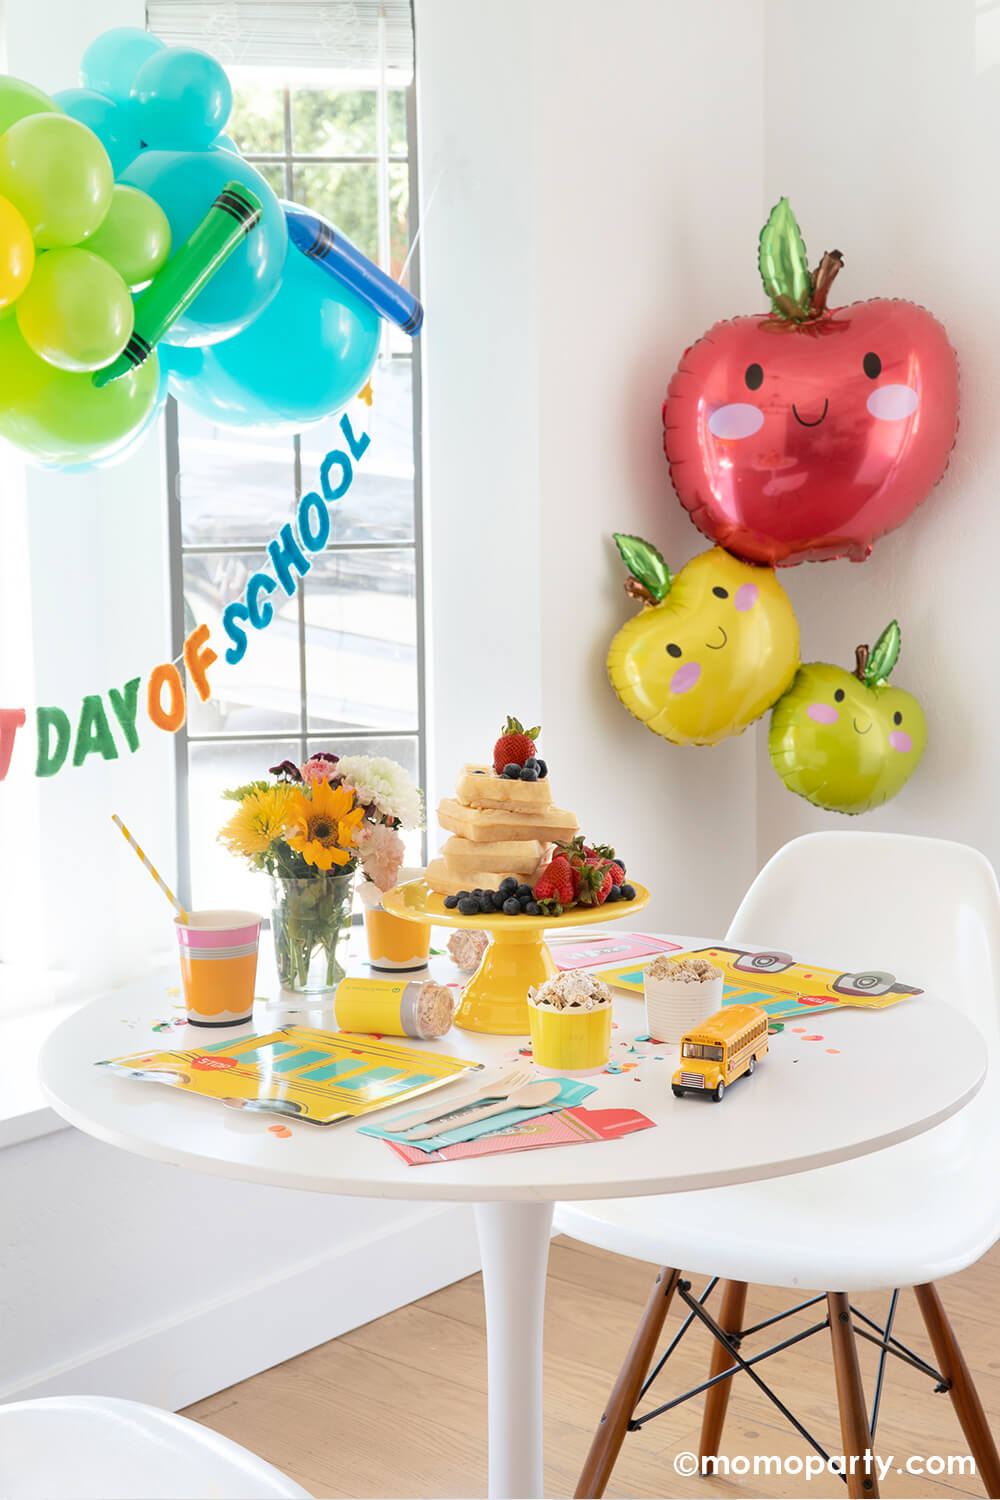 A kitchen table area decorated with back to school themed balloons in fun, bright colors and an apple stacker foil balloon in a adorable illustration appealing to kids. On the table there is a stack of Belgium waffles as the "breakfast cake" and multiple school themed tableware from momoparty.com. All in all creates a great look and inspiration for kid's back to school celebration or party.